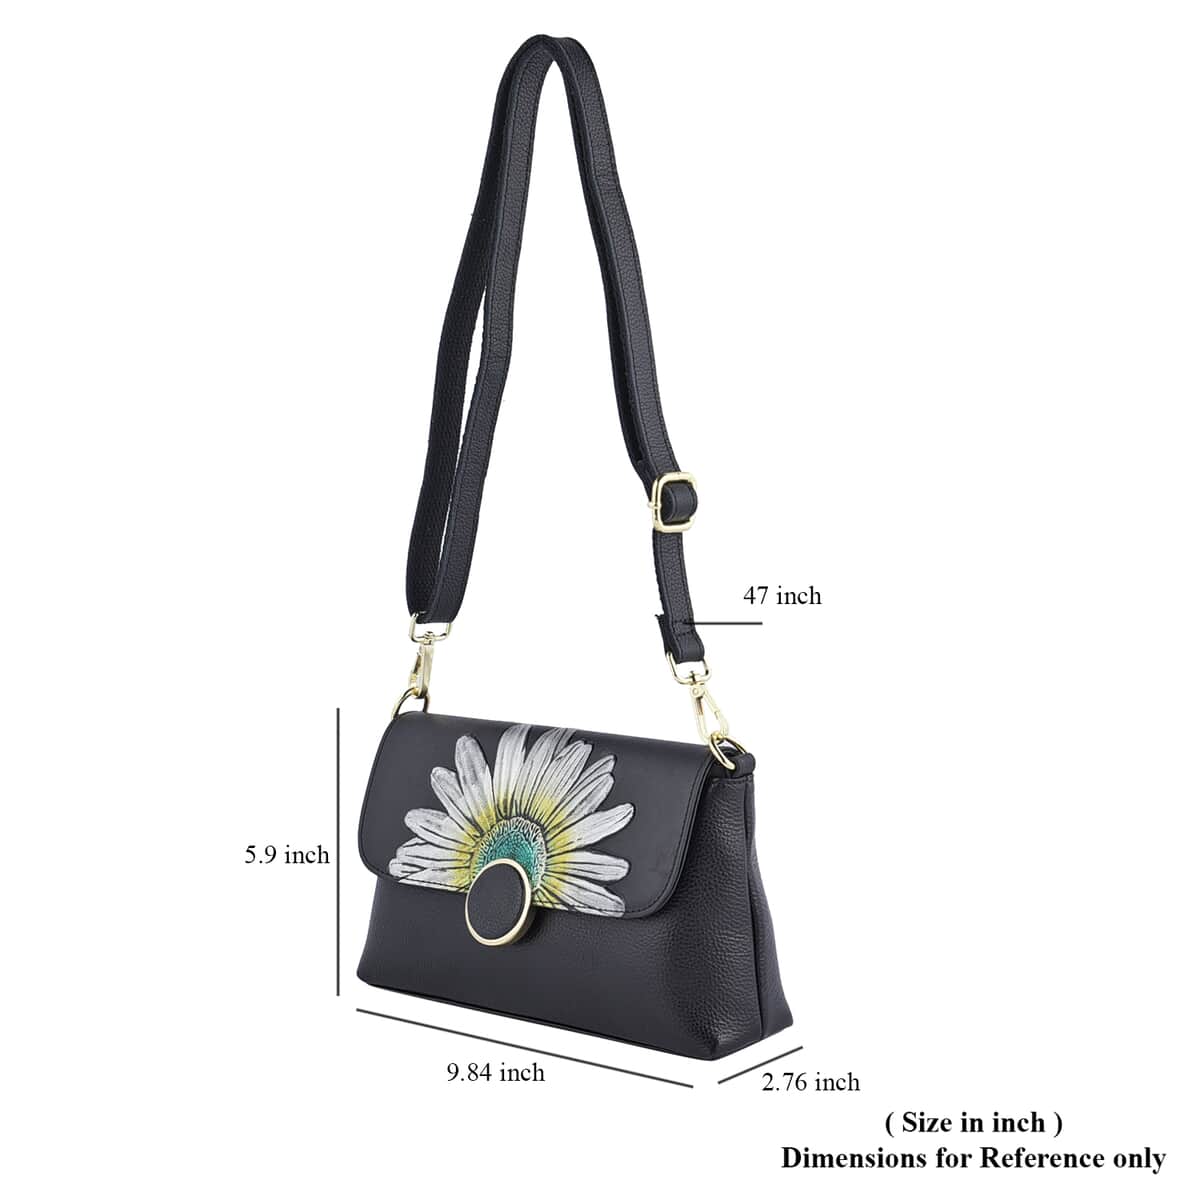 HONG KONG CLOSEOUT Collection Black Color Sunflower Embossed Pattern Genuine Leather Crossbody Bag (9.84"x5.9"x2.76") with Shoulder Strap image number 6